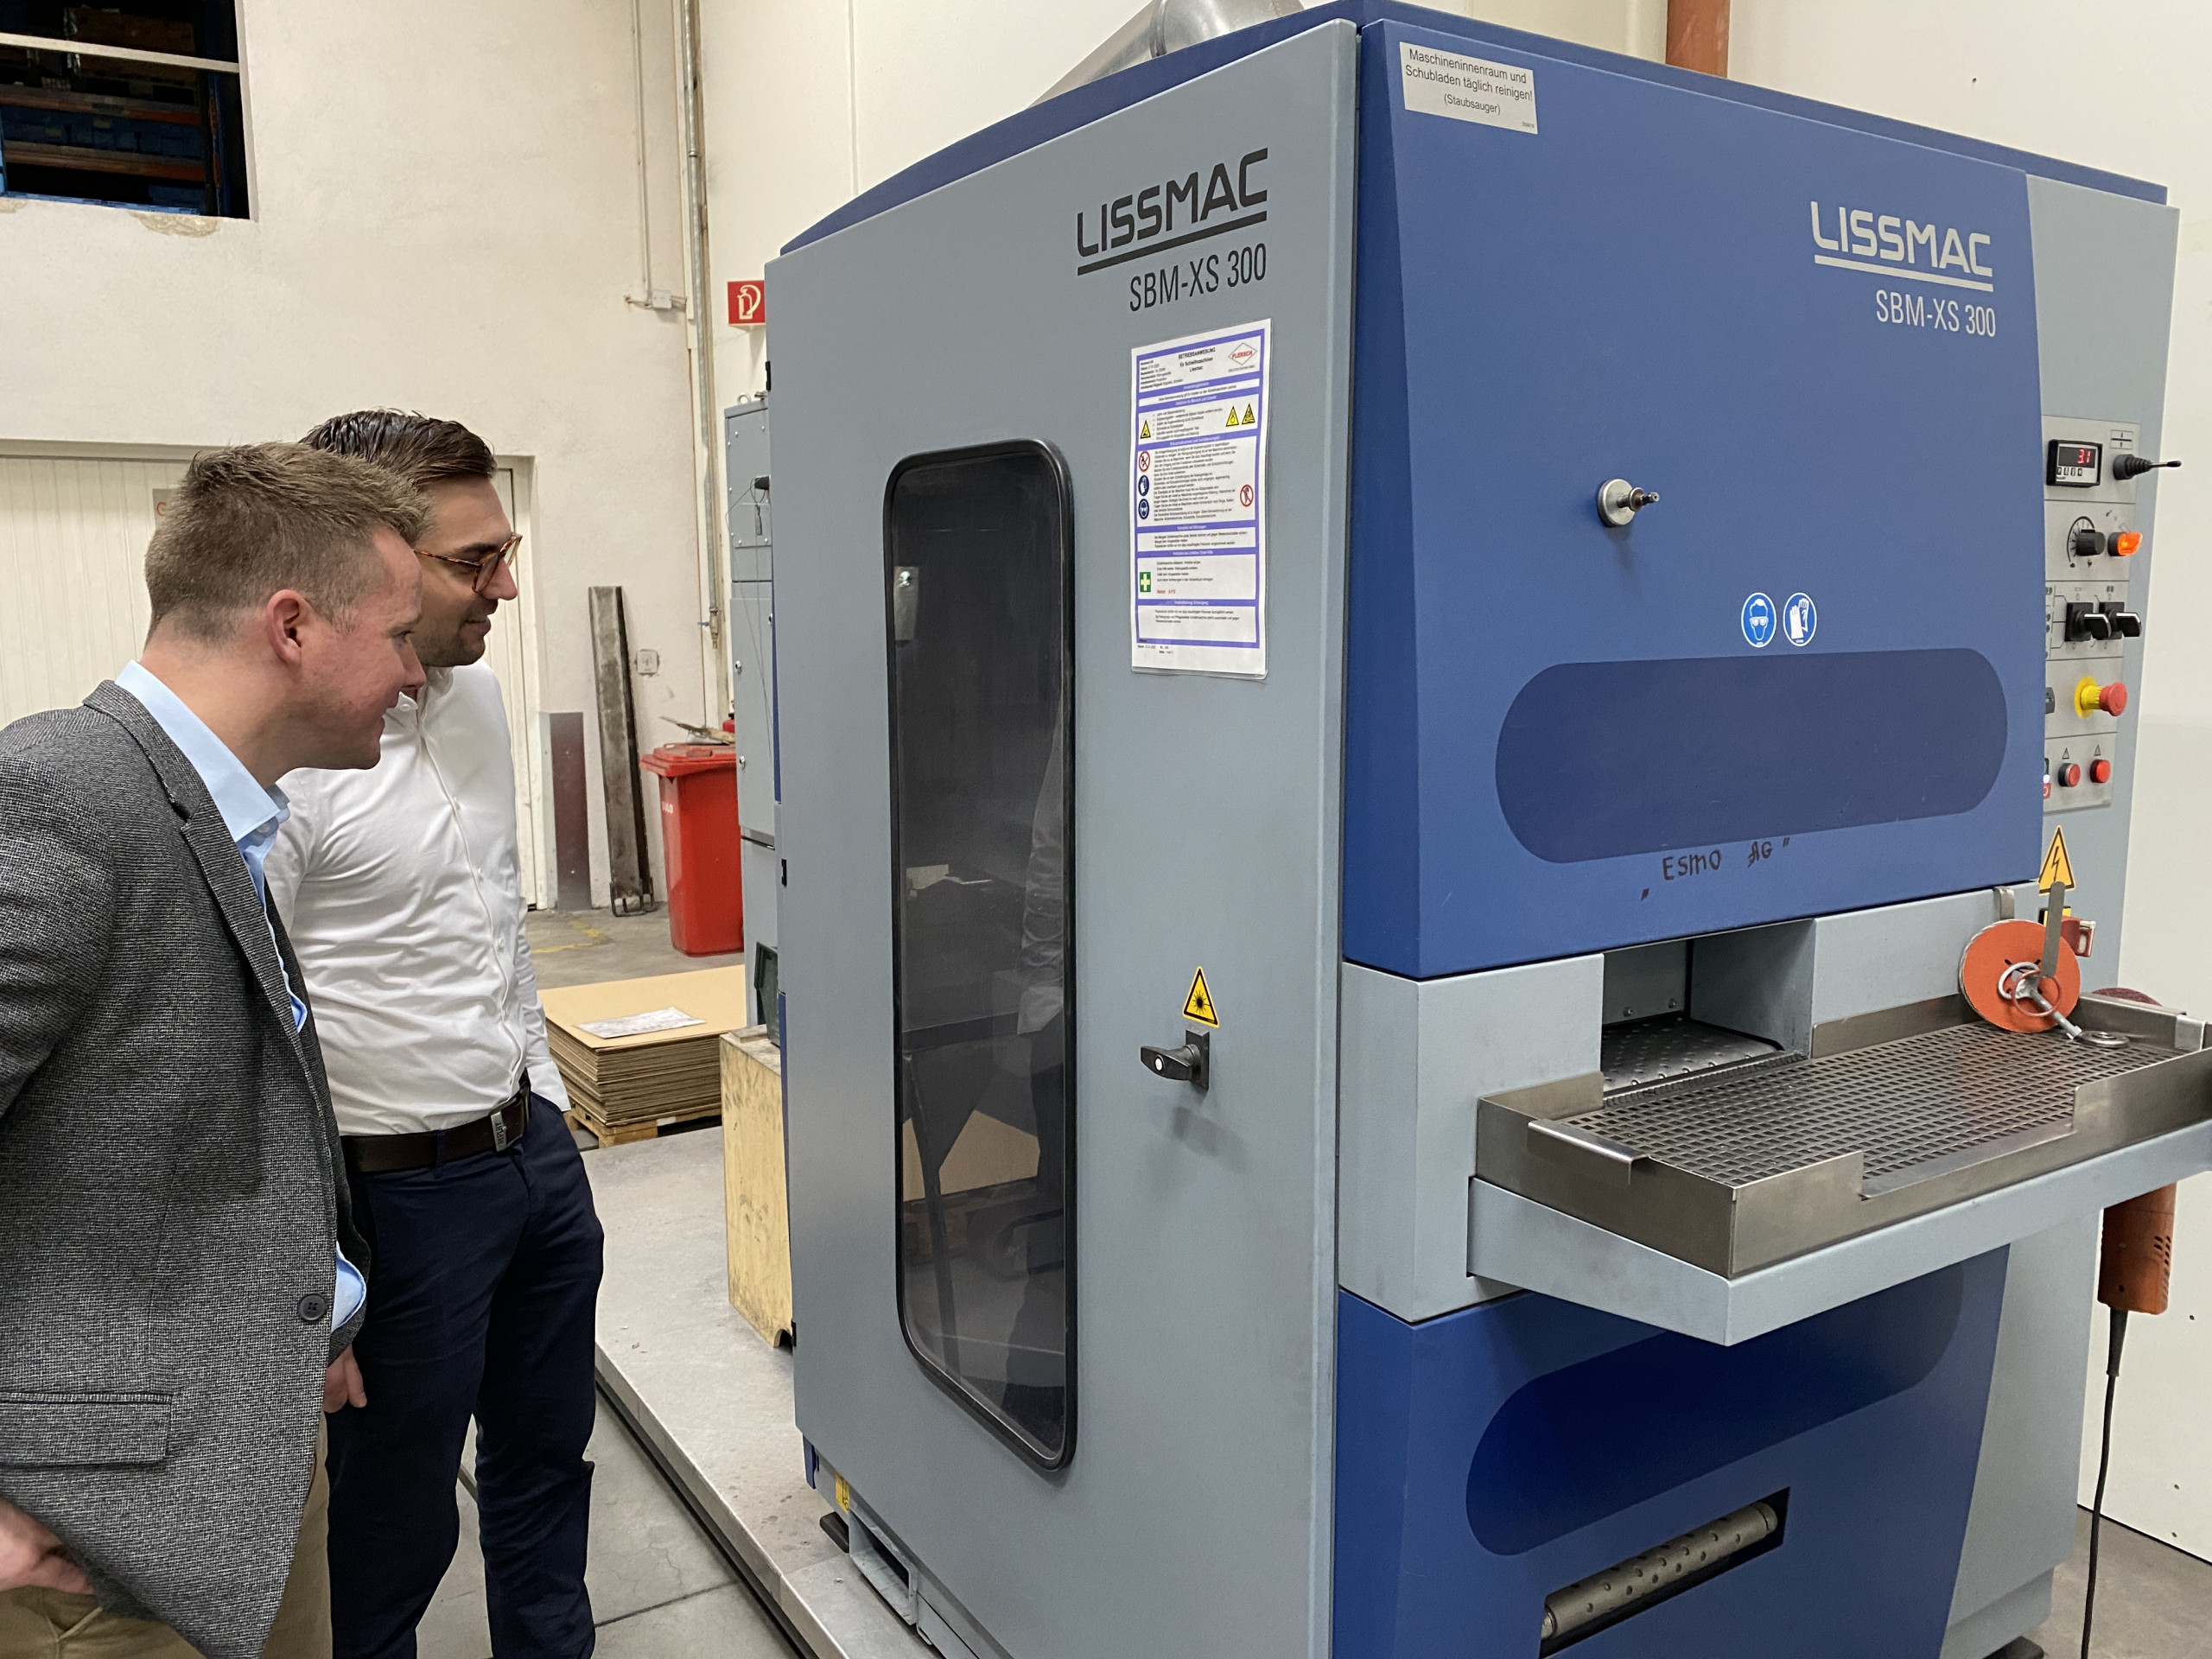 The newly acquired SBM - XS 300 G1E1 will be used for double-sided machining of small parts, especially for components with batch sizes of 5000 pieces per month, as well as for other small parts to bypass vibratory grinding and significantly minimize the throughput time of these parts. © Lissmac